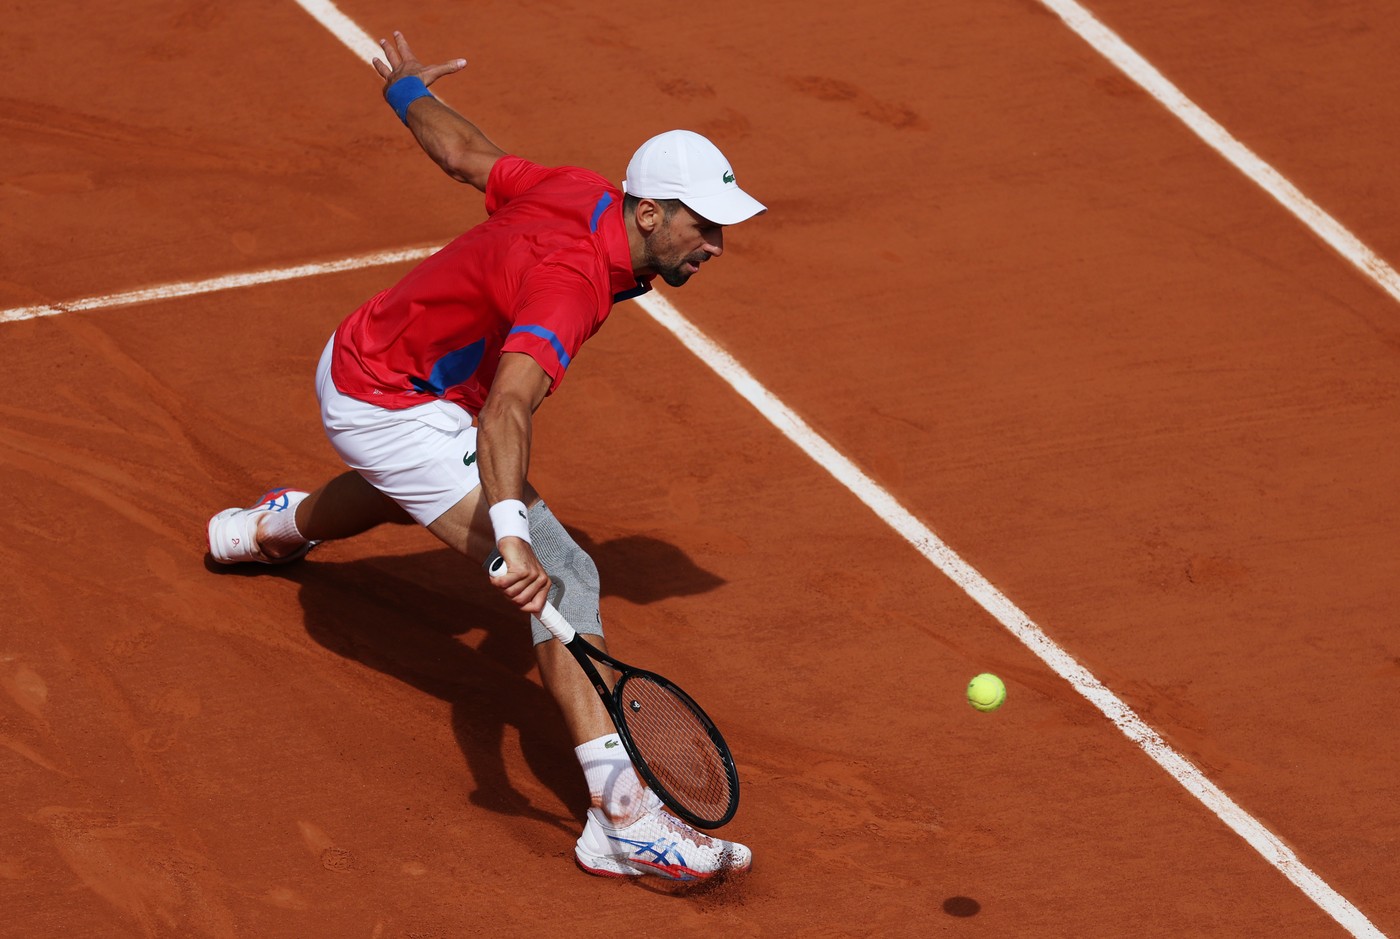 PARIS, Aug. 4, 2024  -- Novak Djokovic of Serbia competes during the men's singles gold medal match of tennis between Novak Djokovic of Serbia and Carlos Alcaraz of Spain at the Paris 2024 Olympic Games in Paris, France, on Aug. 4, 2024.,Image: 895908343, License: Rights-managed, Restrictions: , Model Release: no